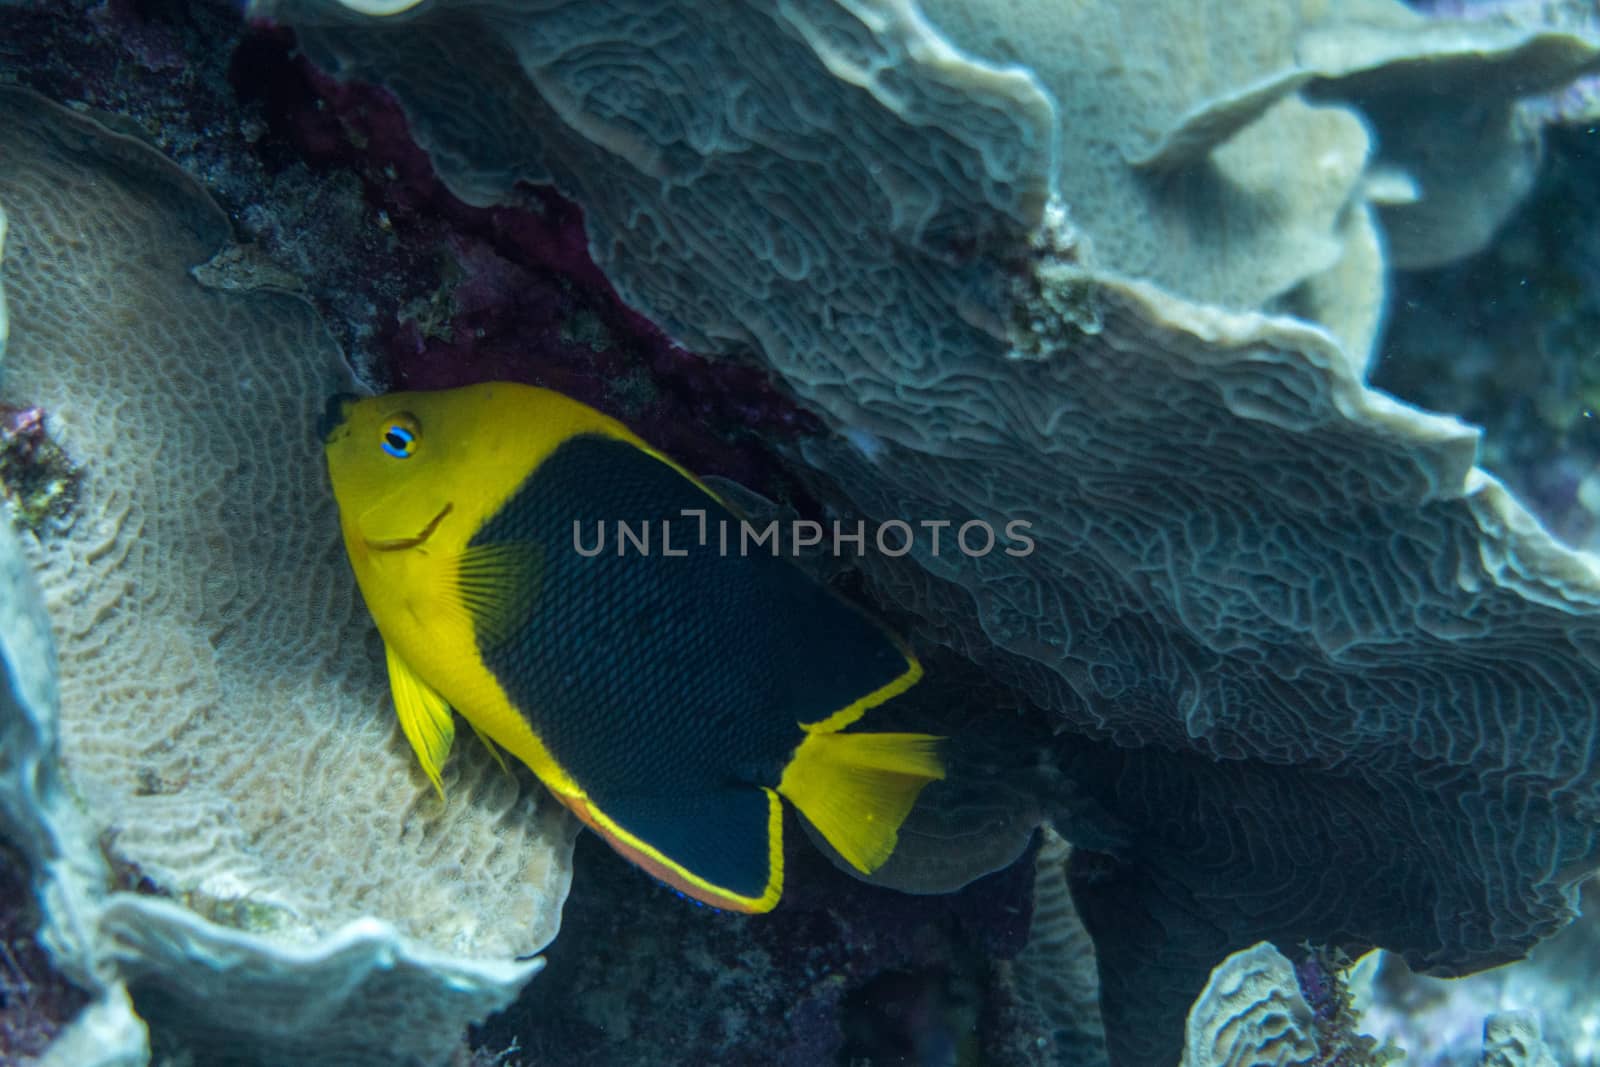 The rock beauty (Holacanthus tricolor) is a species of marine angelfish of the family Pomacanthidae. Other common names include corn sugar, coshubba, rock beasty and yellow nanny.